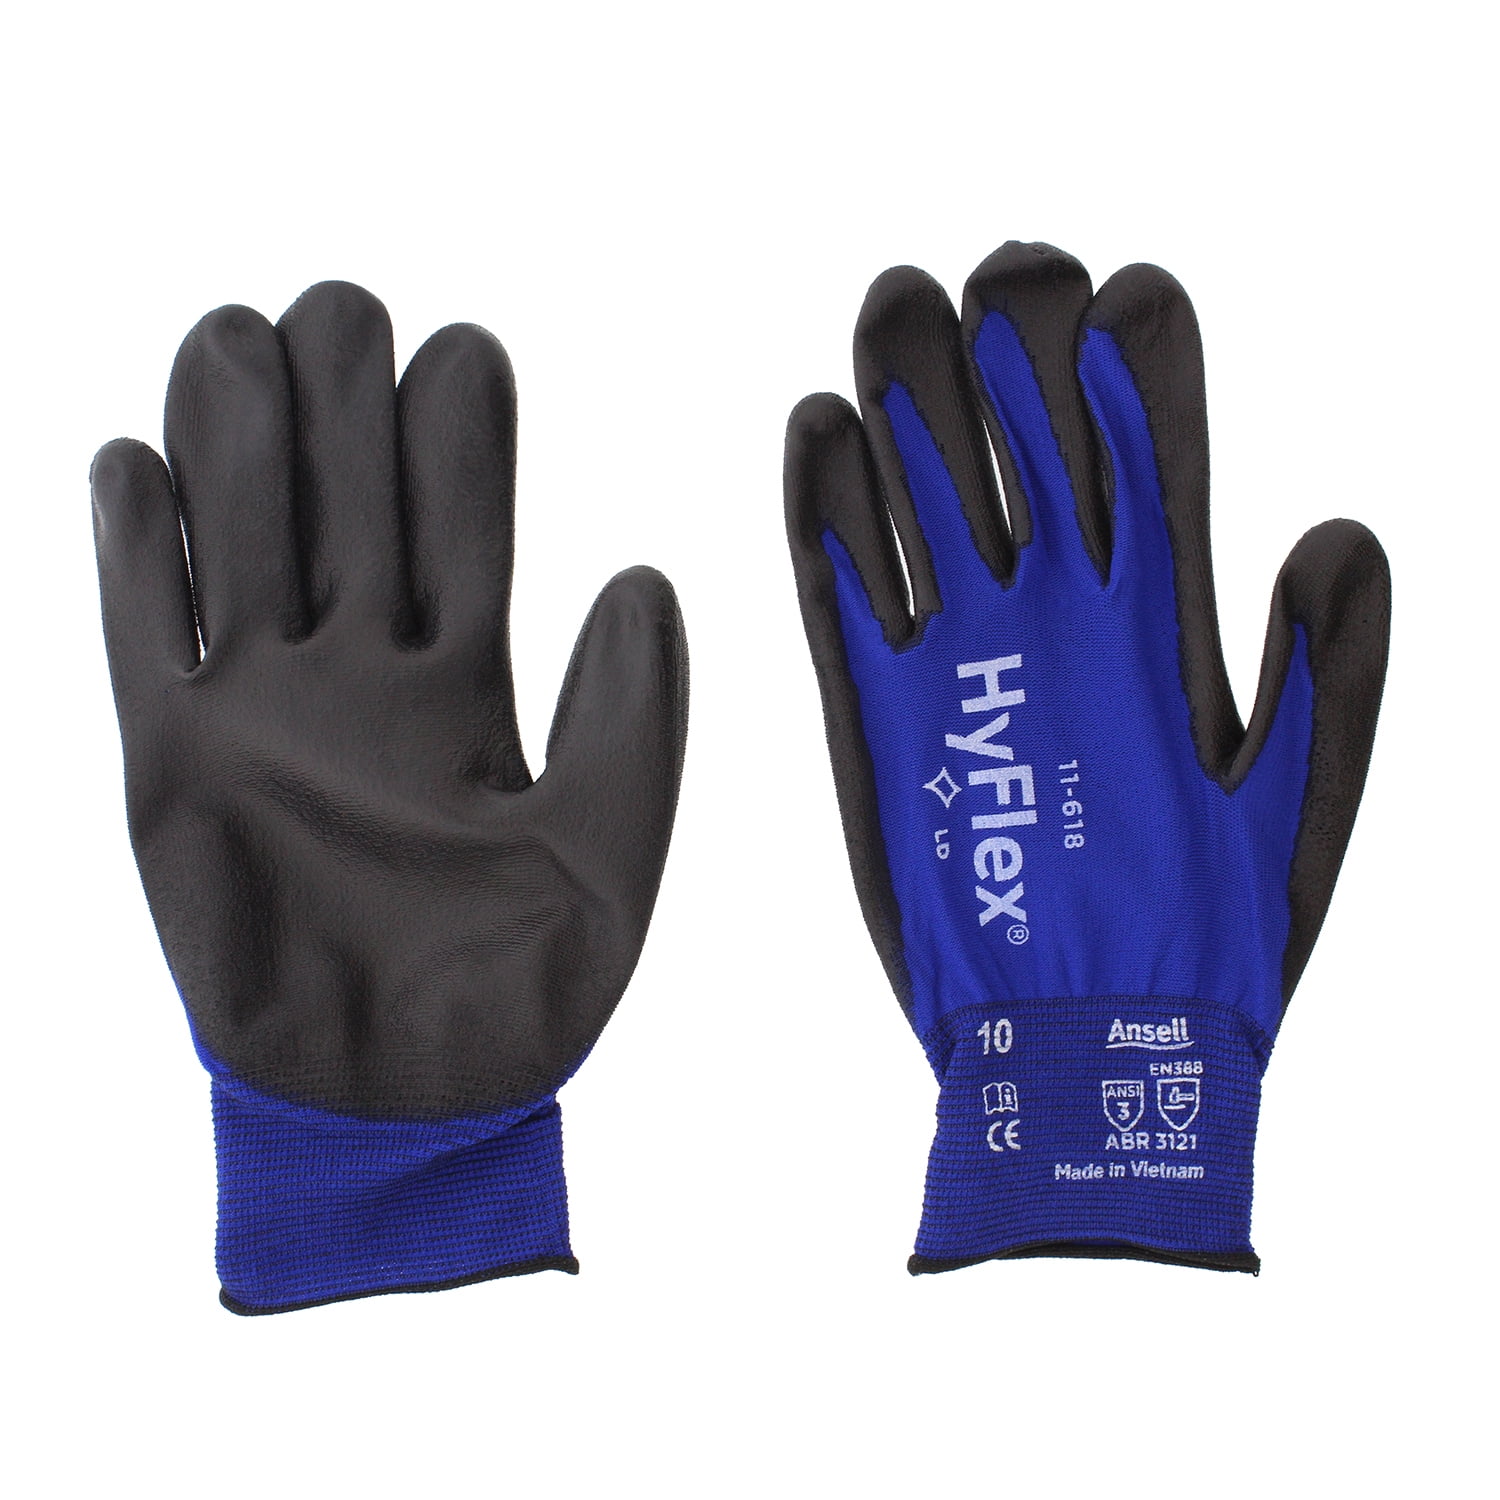 Ansell HyFlex 11-618 Work Gloves in Nylon Pack of 12 Extra-Thin Blue Black Mens Workwear Durable Size 6 Mechanics Glove for Multi-purpose